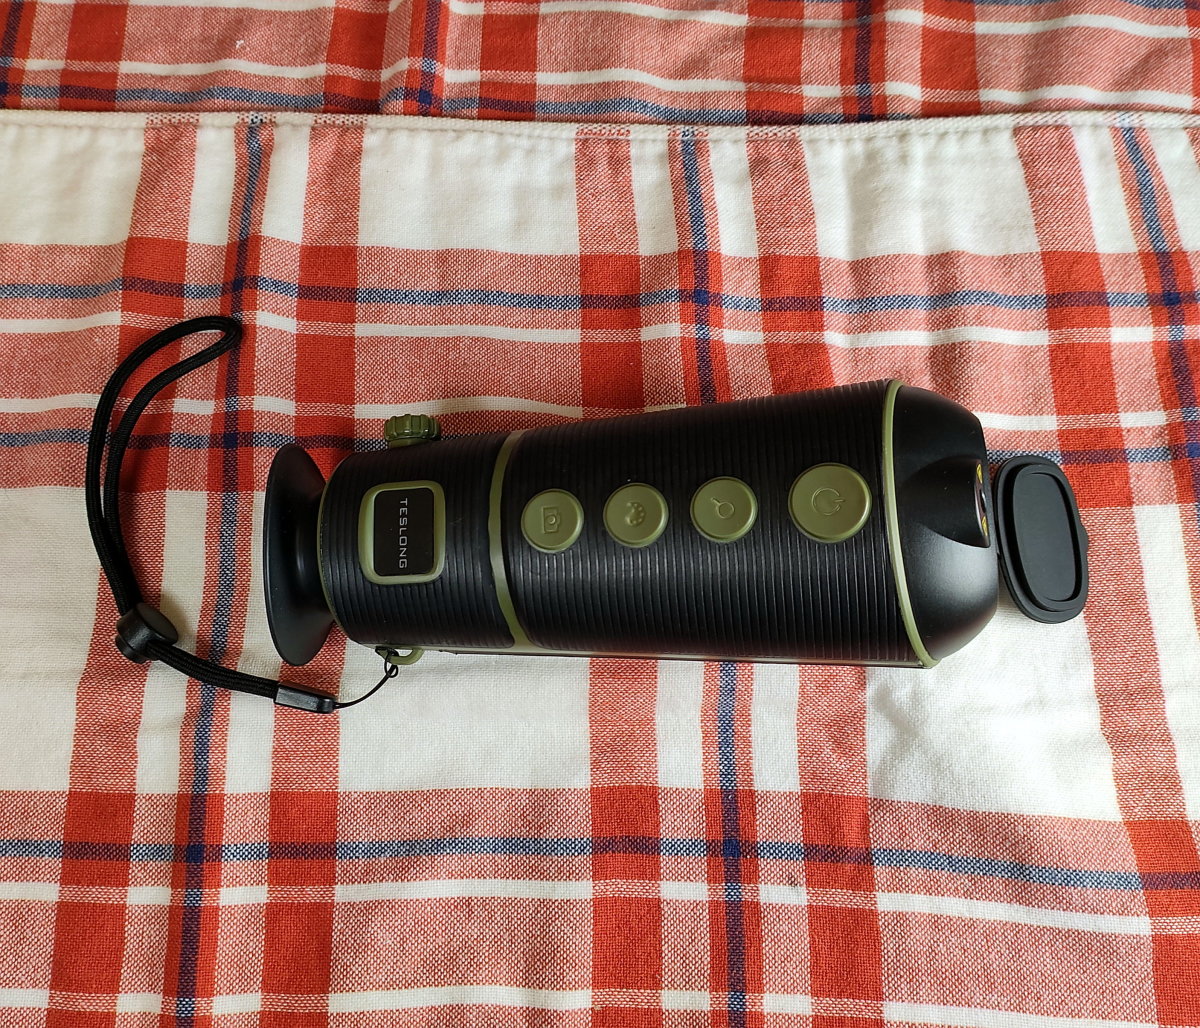 Review of the TESLONG Infrared Thermal Monocular